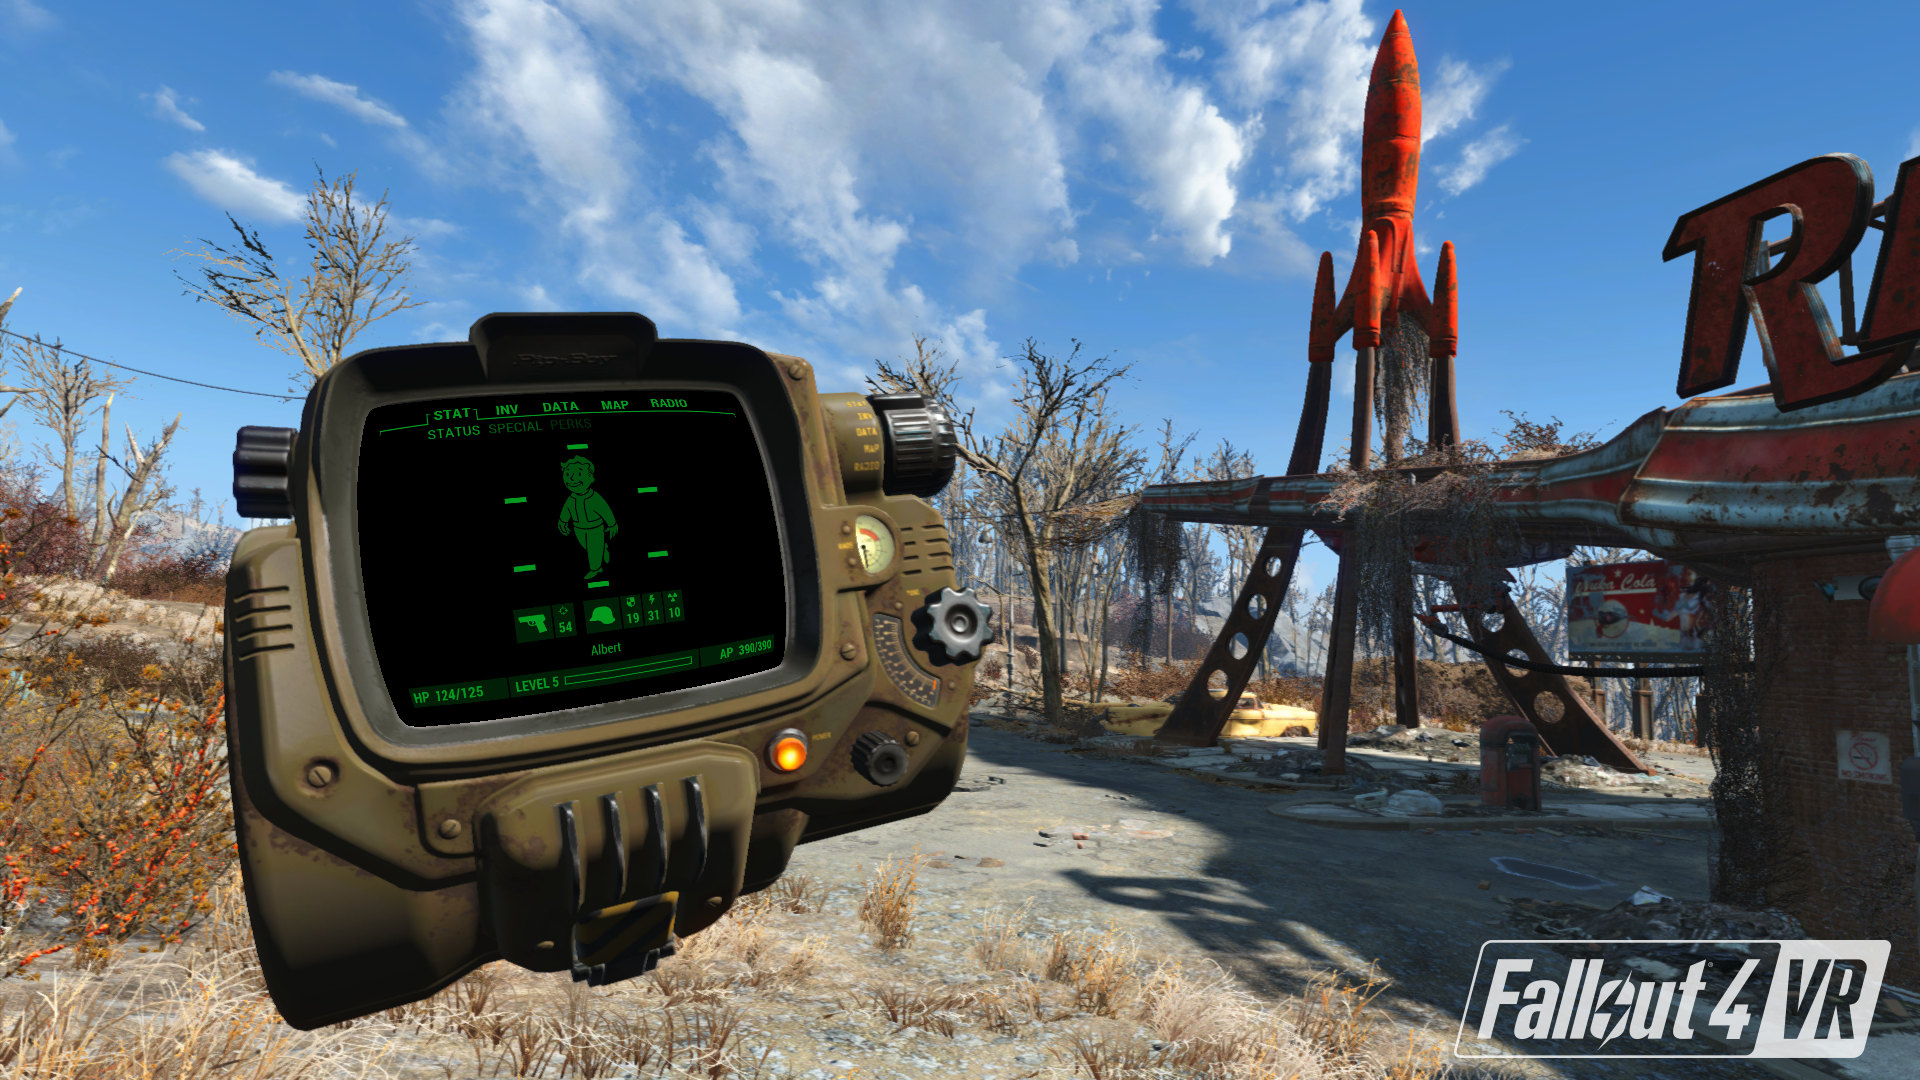 Image for Fallout 4 VR to be bundled with new HTC Vive headsets, and there's a bonus for you early adopters, too